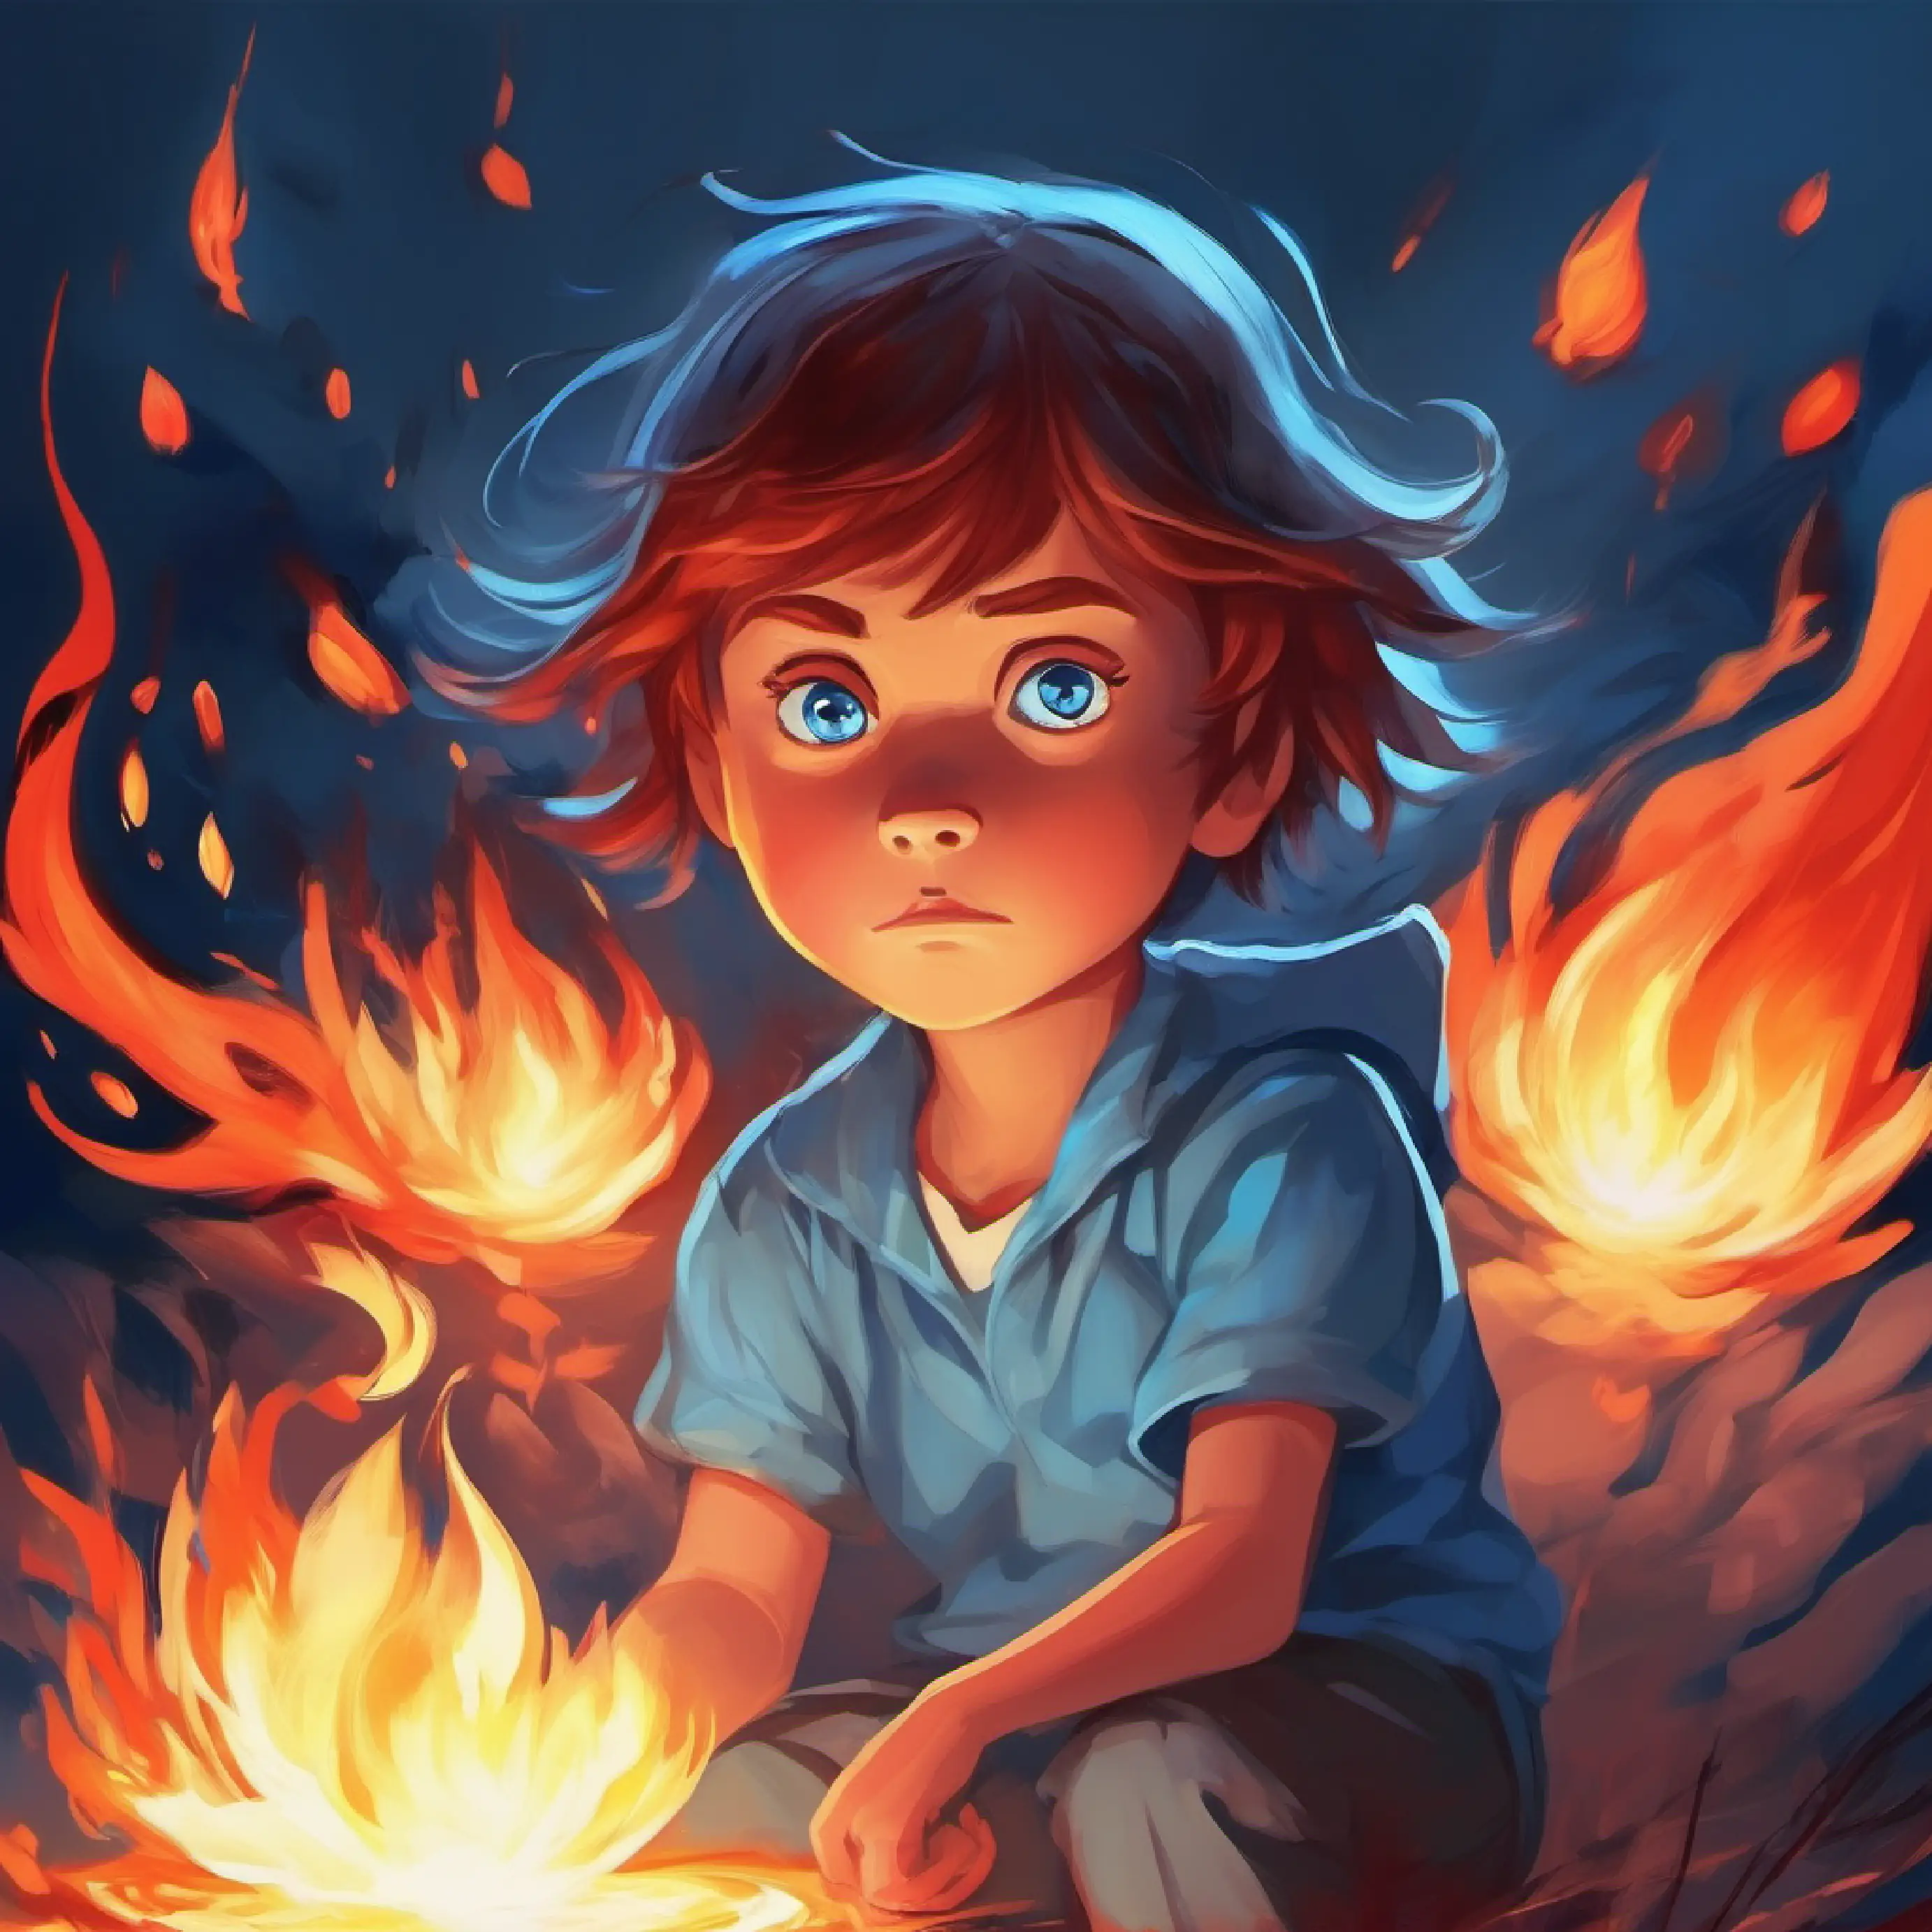 Fiery, mad child with bright red eyes and a flaming glow rebuffs Calm, sad child with light blue eyes and deep blue glow's effort, making Calm, sad child with light blue eyes and deep blue glow sadder.